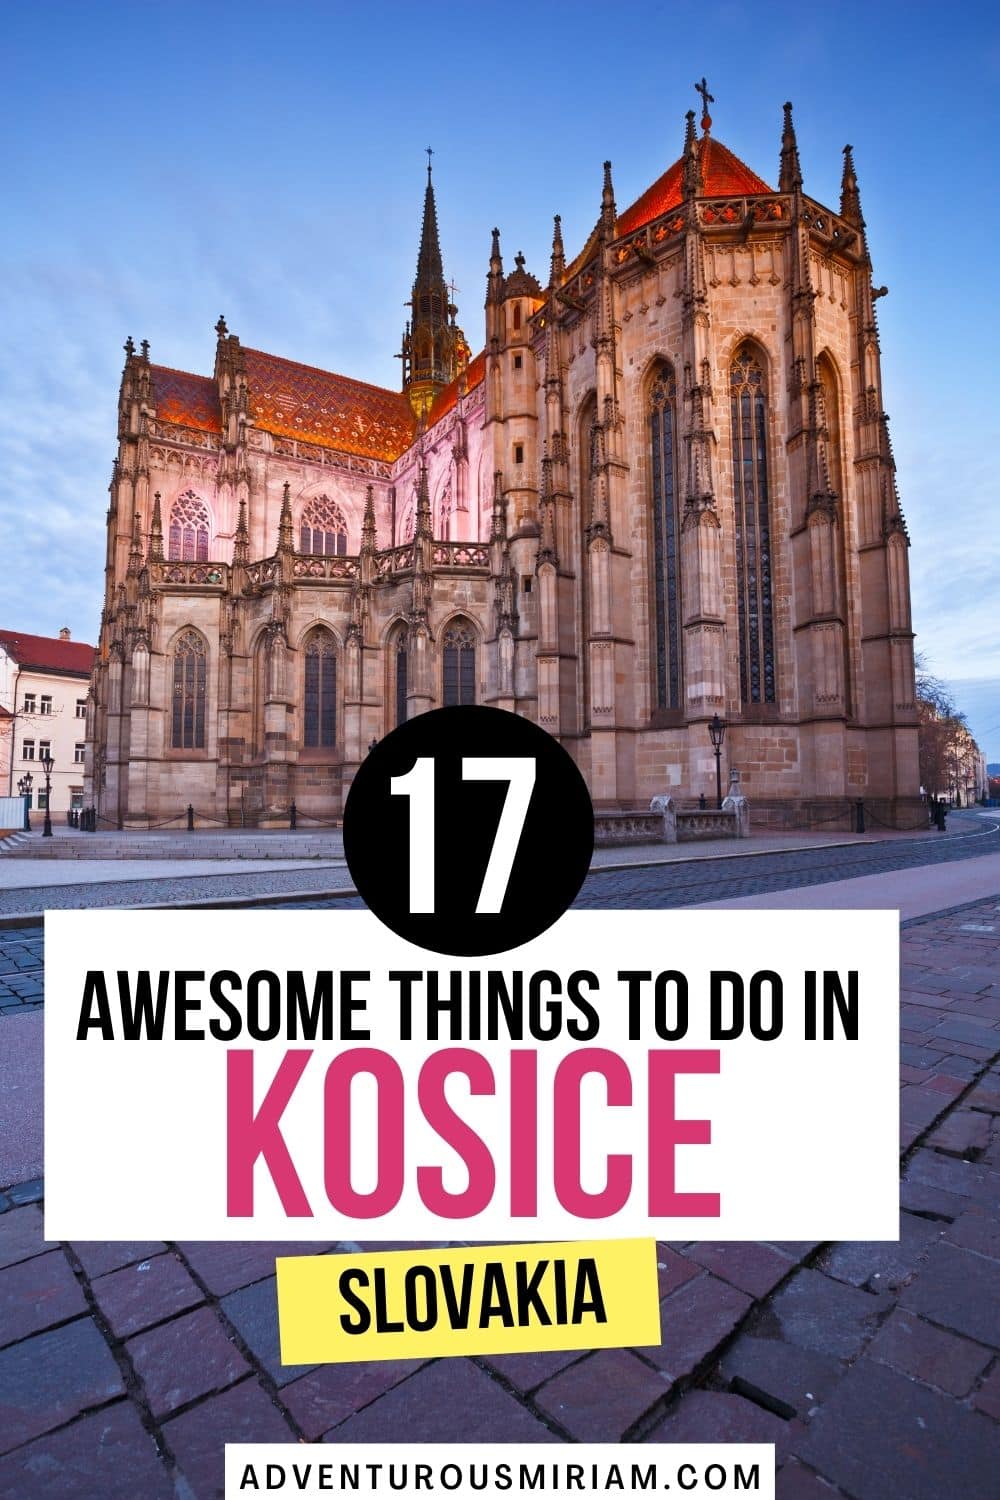 Košice is one of the most underrated cities and hidden gems in Europe. It's the second largest city in Slovakia, and in 2013 it was the European Capital of Culture. It’s still fairly small and easy to get around though, especially if you’re staying in Košice center near the pedestrian street. Here's a list of all the amazing things to do in Kosice, Slovakia. Kosice slovakia travel. Kosice slovakia photography. Visit kosice. Europe travel